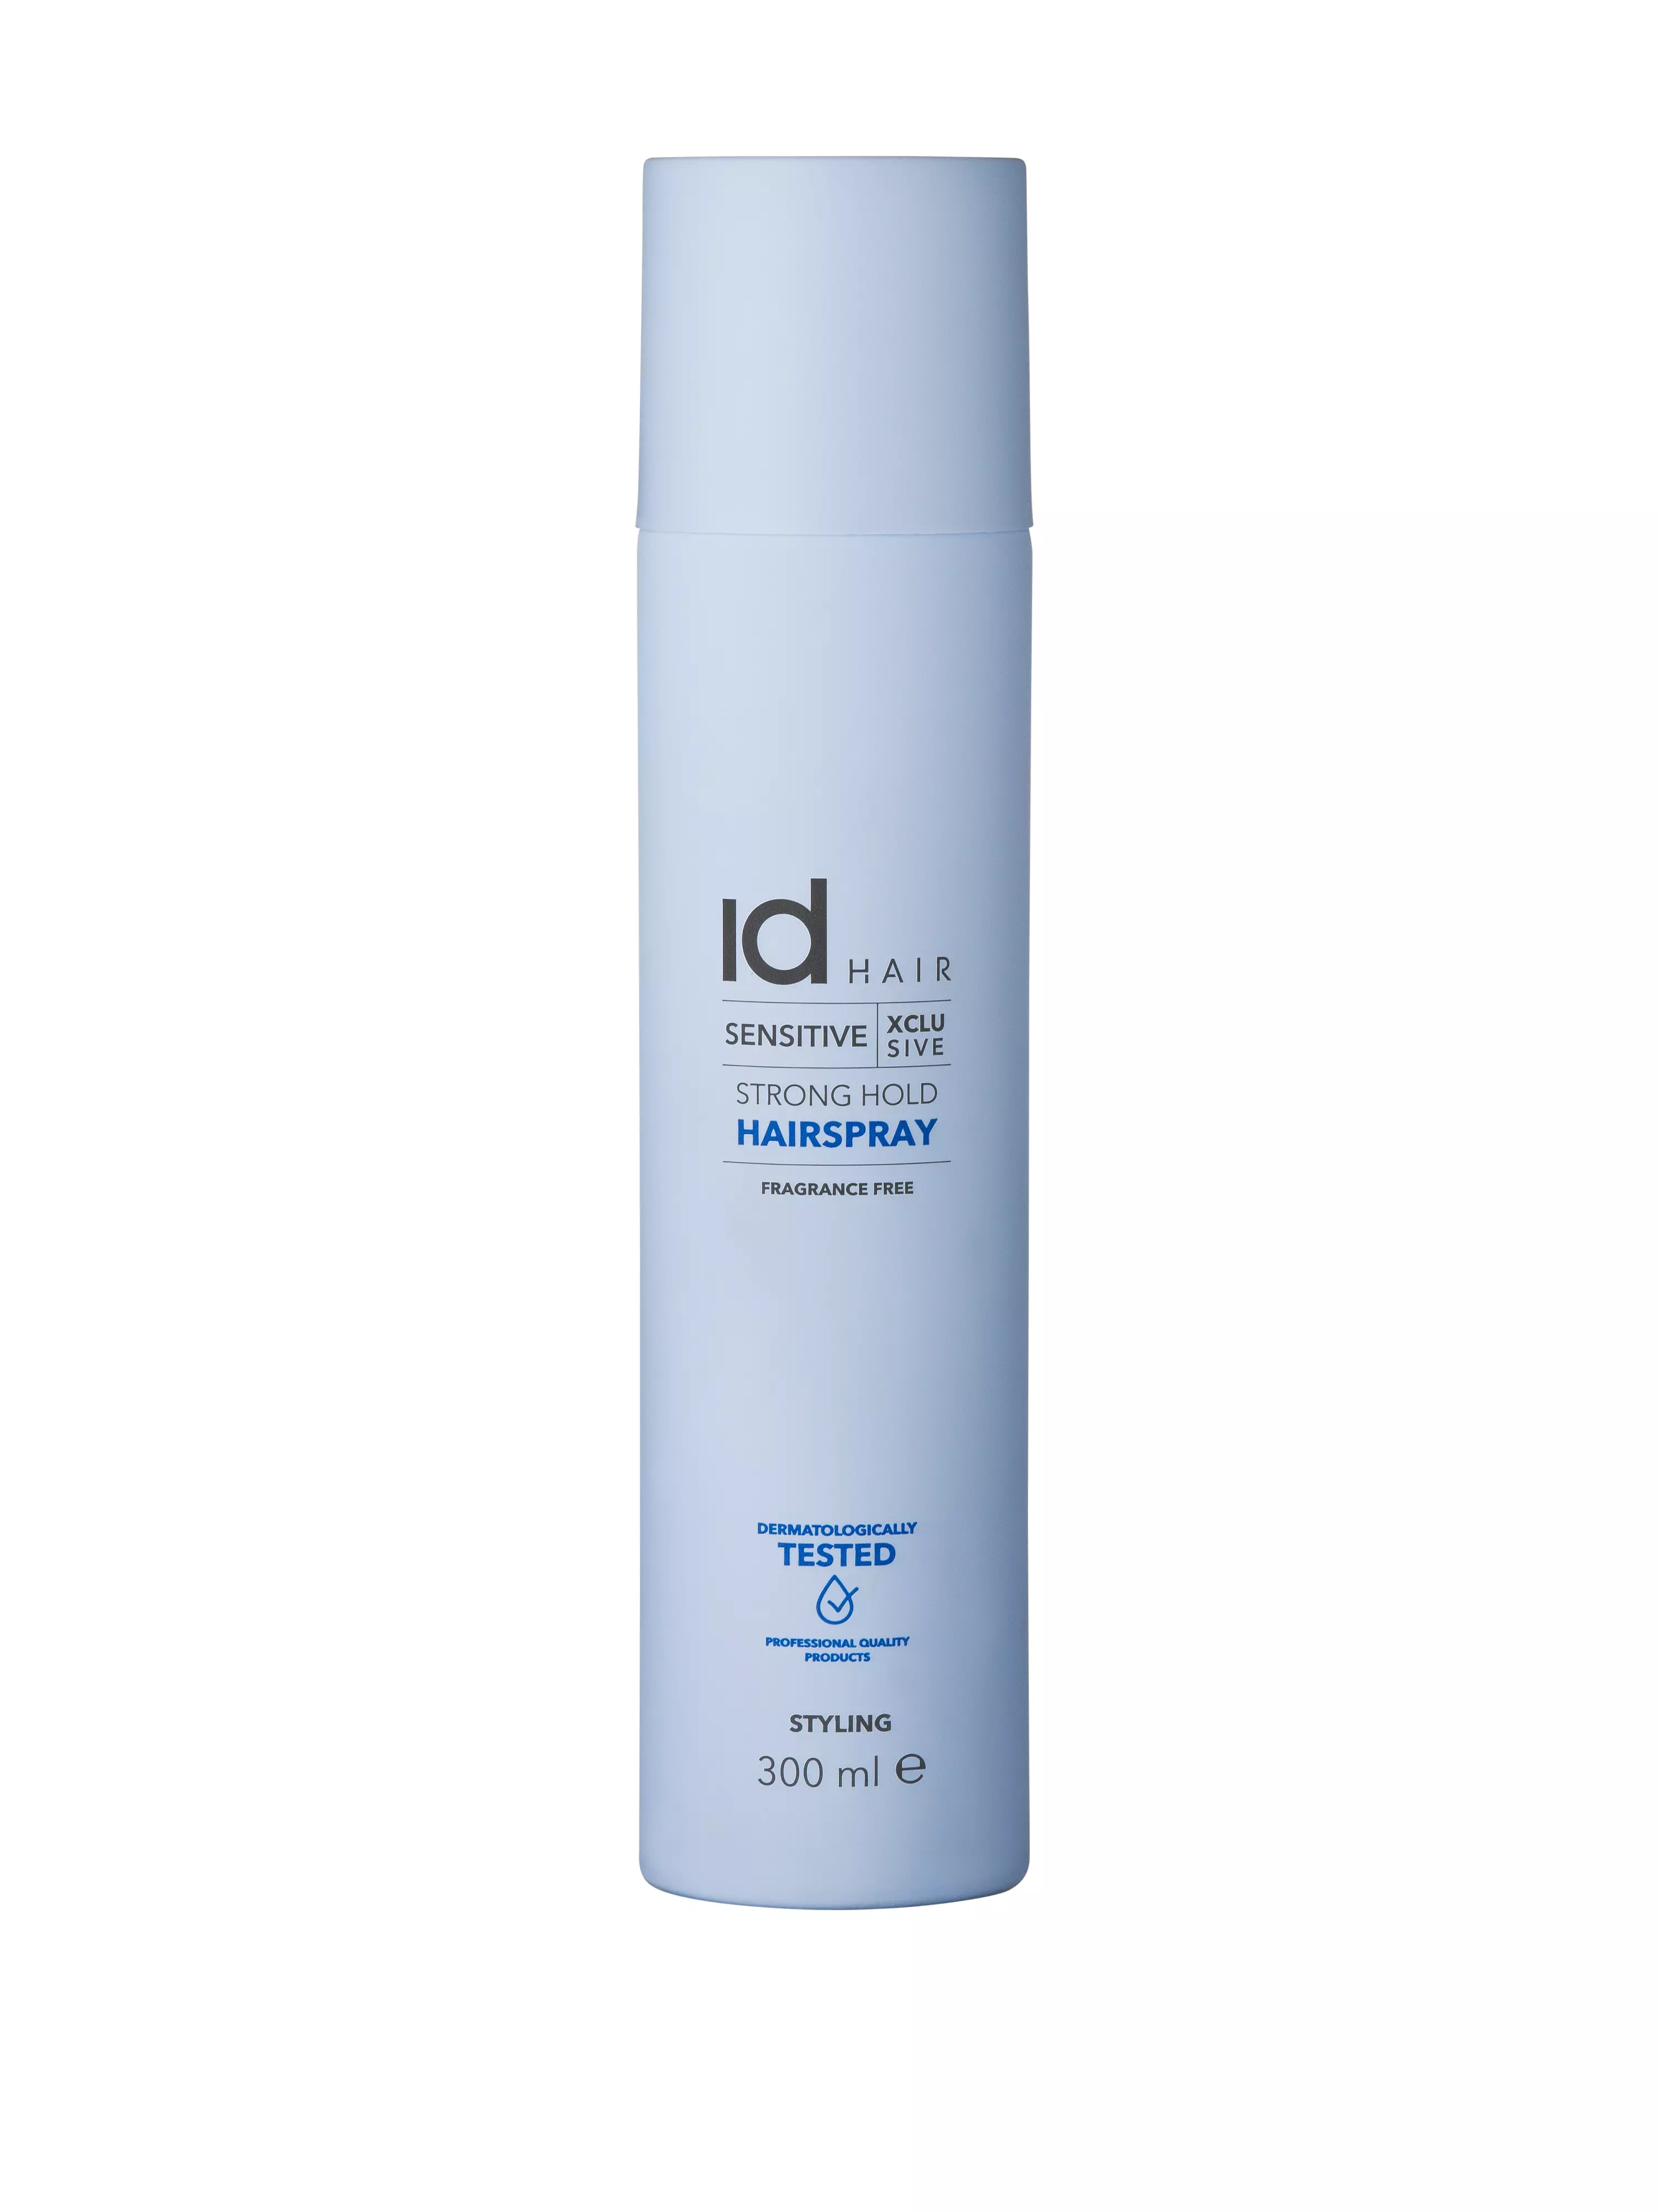 Idhair Sensitive Xclusive Strong Hold Hairspray